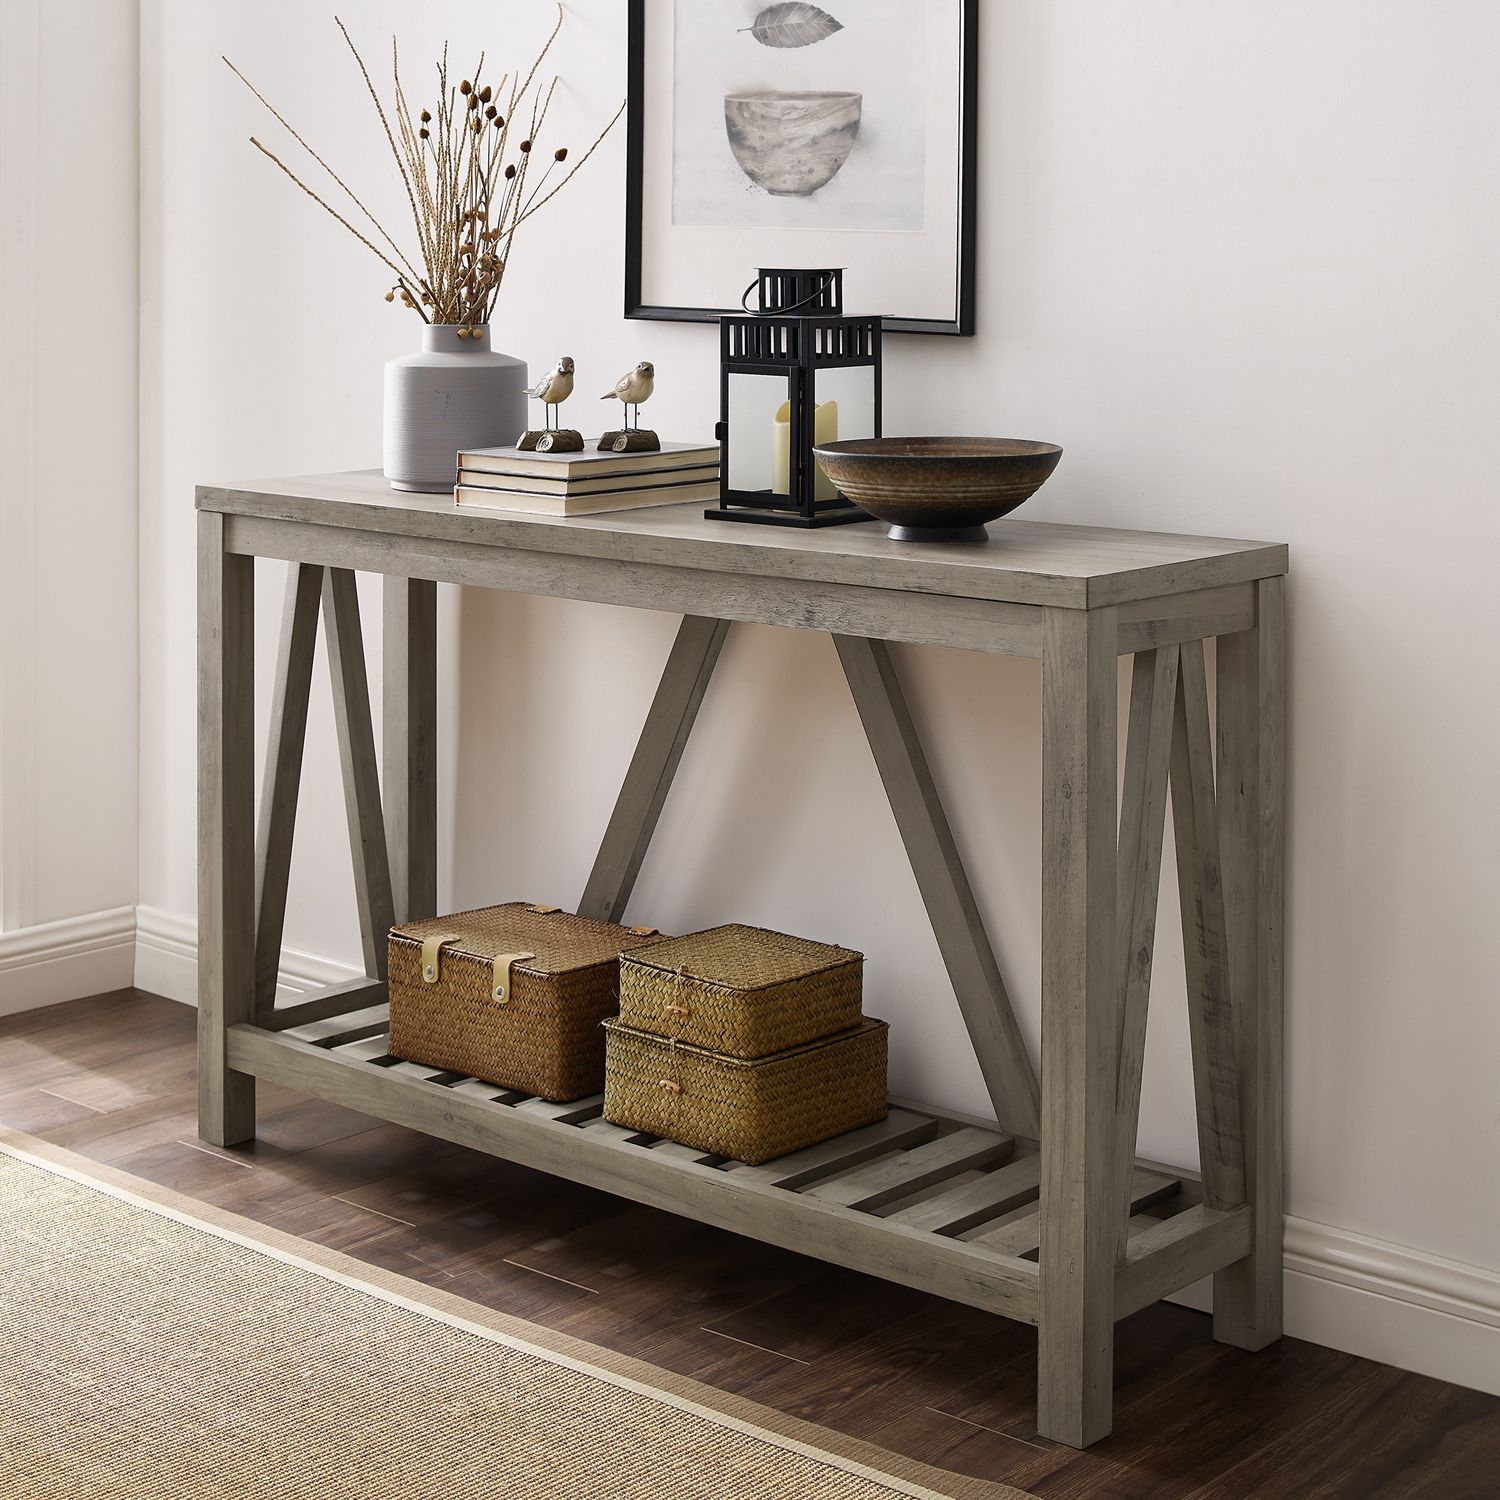 A Frame Rustic Gray Wash Console Table – Pier1 Imports Within Rustic Barnside Console Tables (View 10 of 20)